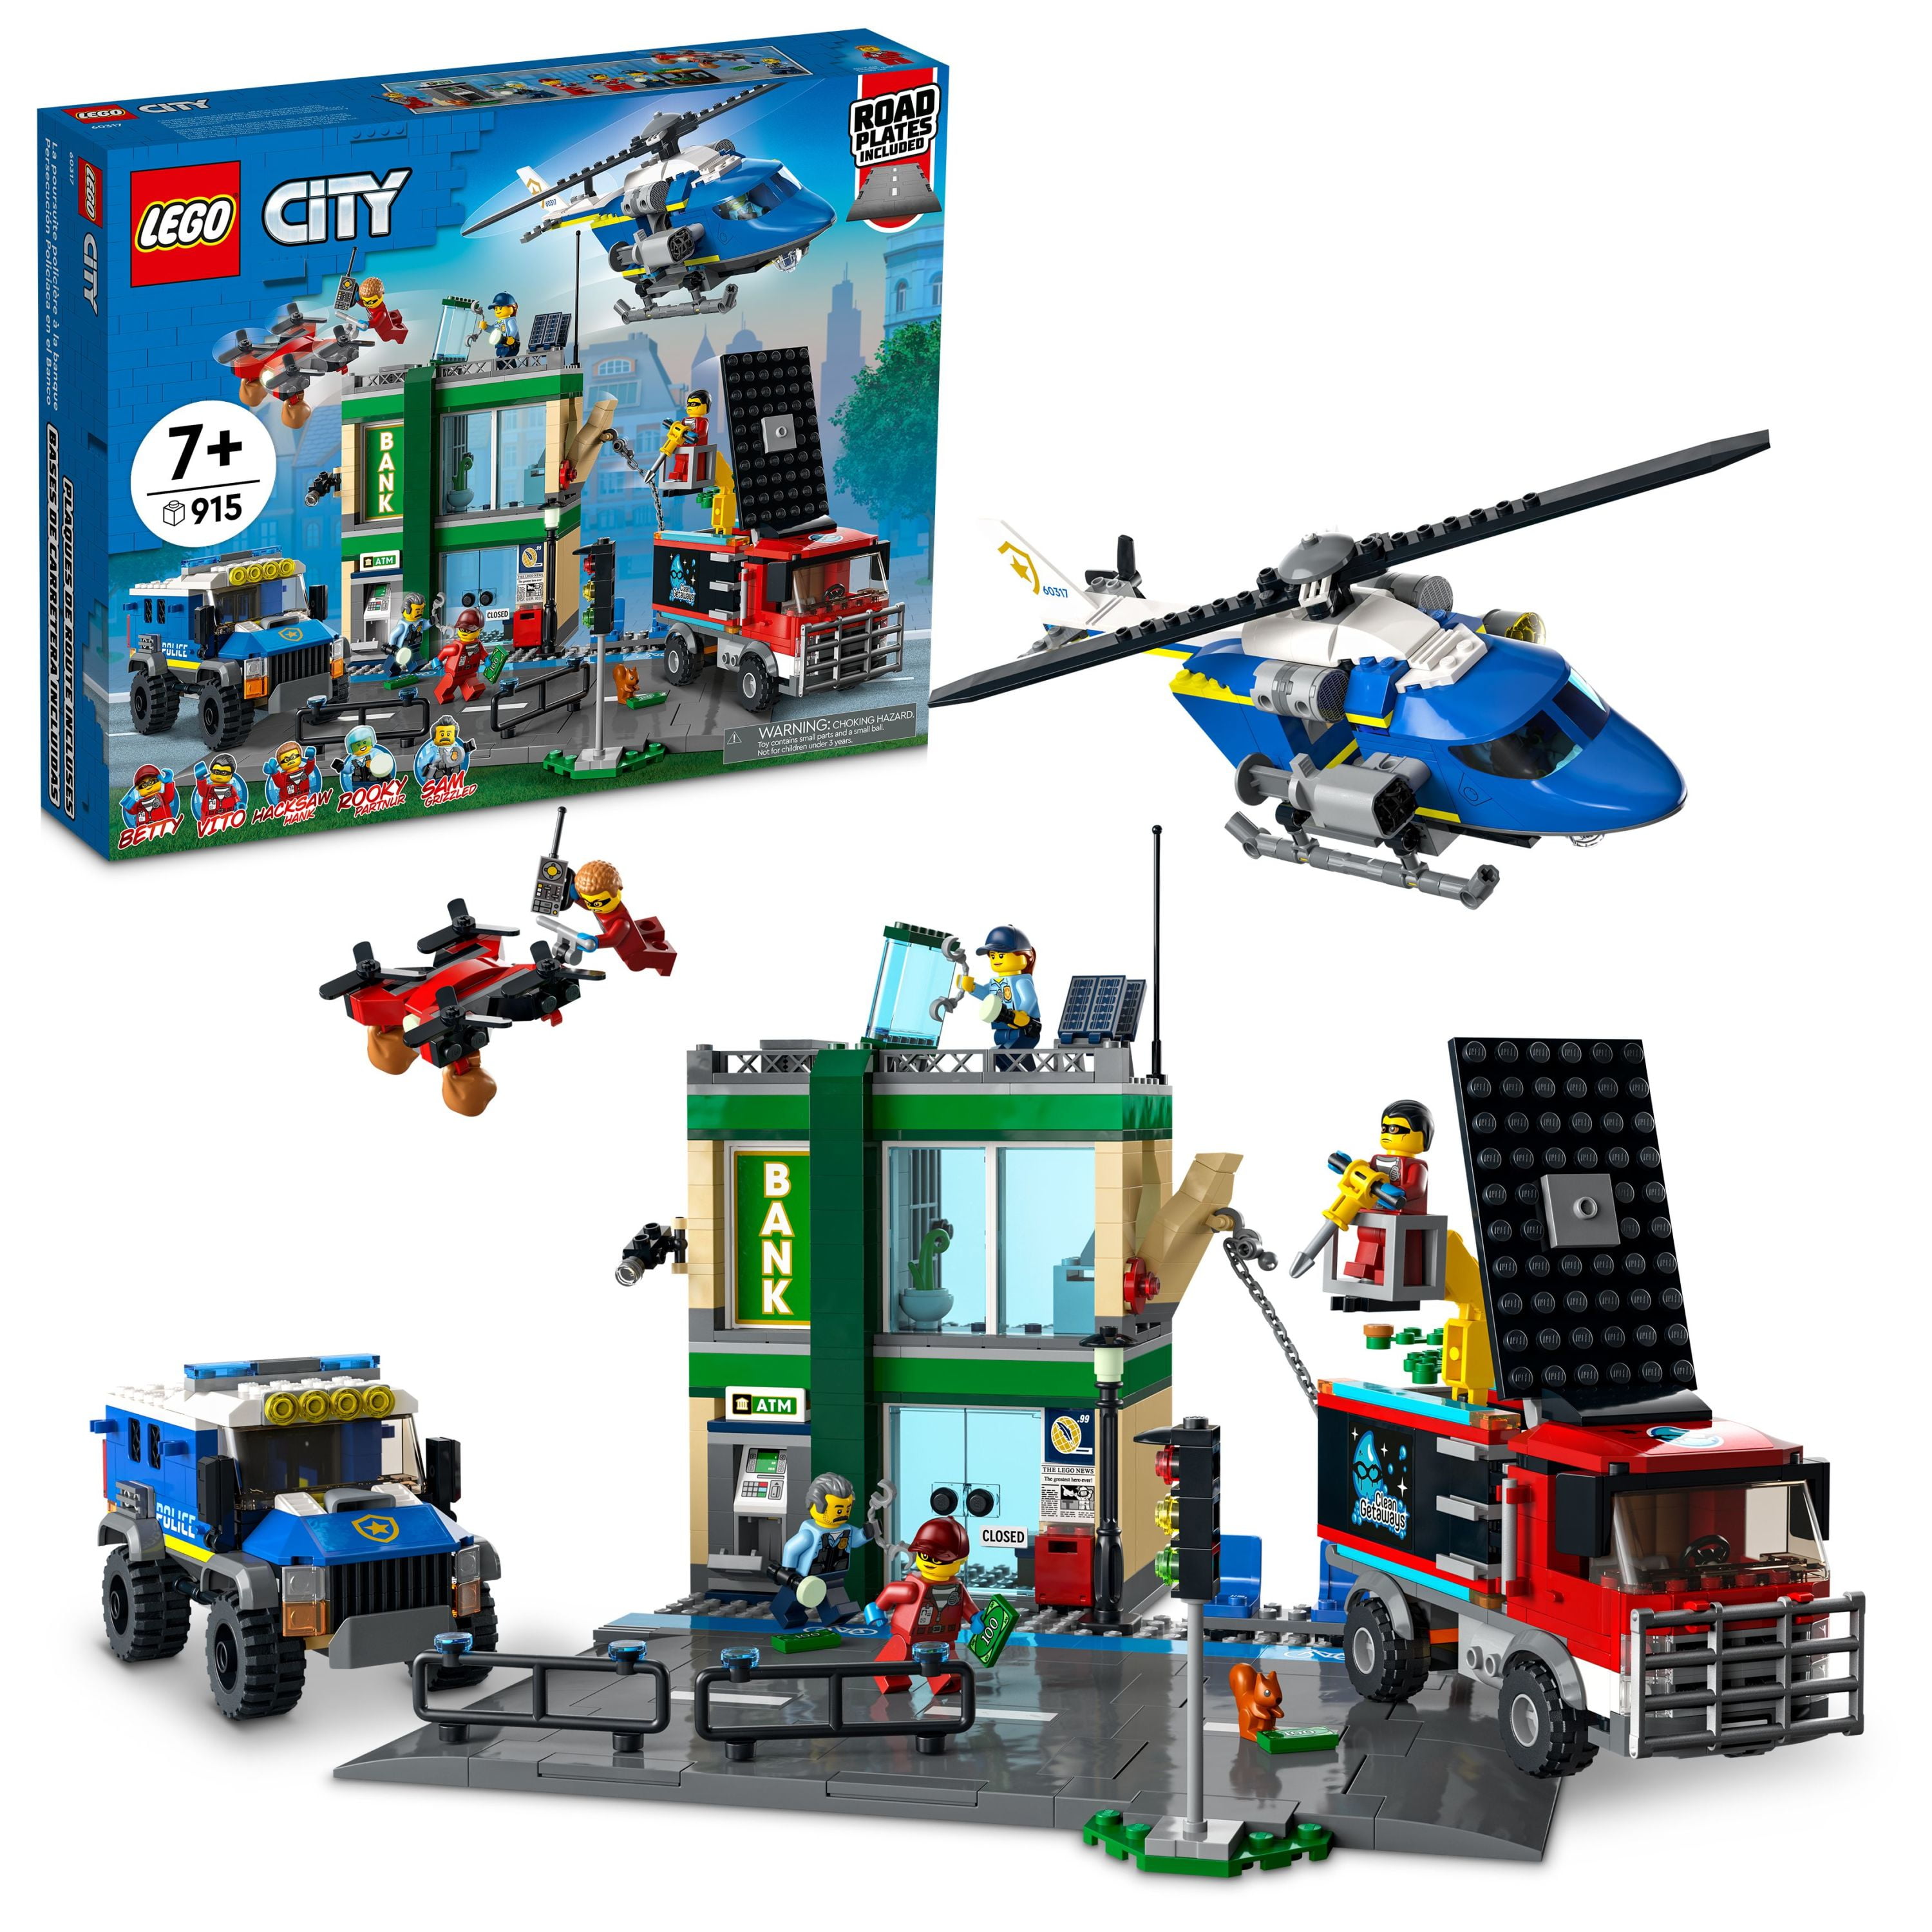 City Police Chase 60317 Bank with Helicopter, Drone and 2 Truck Toys for Kids 7 Plus Years Old, 2022 Adventures Series Building Sets - Walmart.com